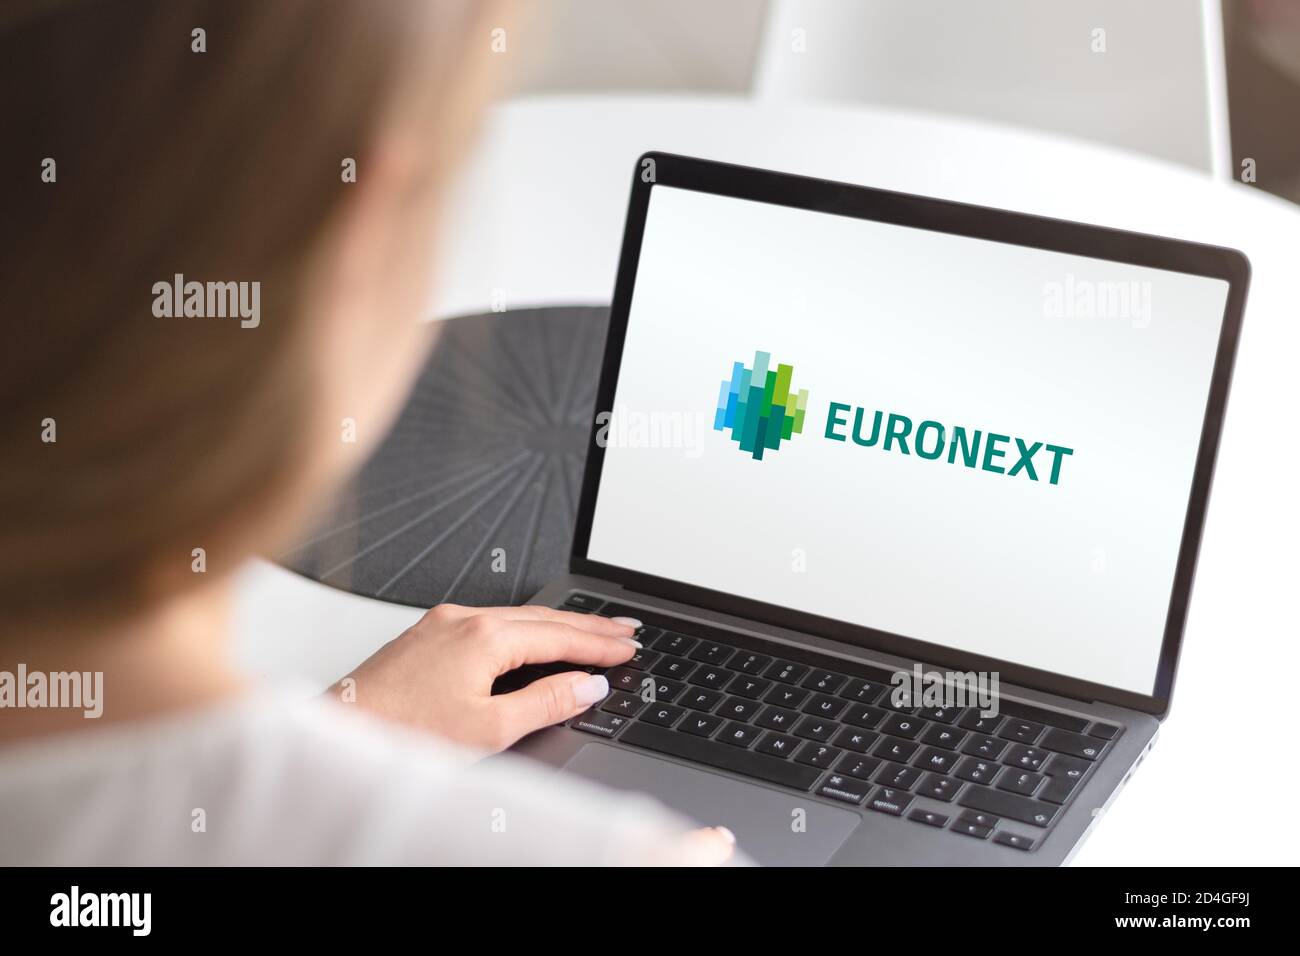 Guilherand-Granges, France - October 09, 2020. Notebook with Euronext logo. Largest stock exchange in Europe. Stock Photo